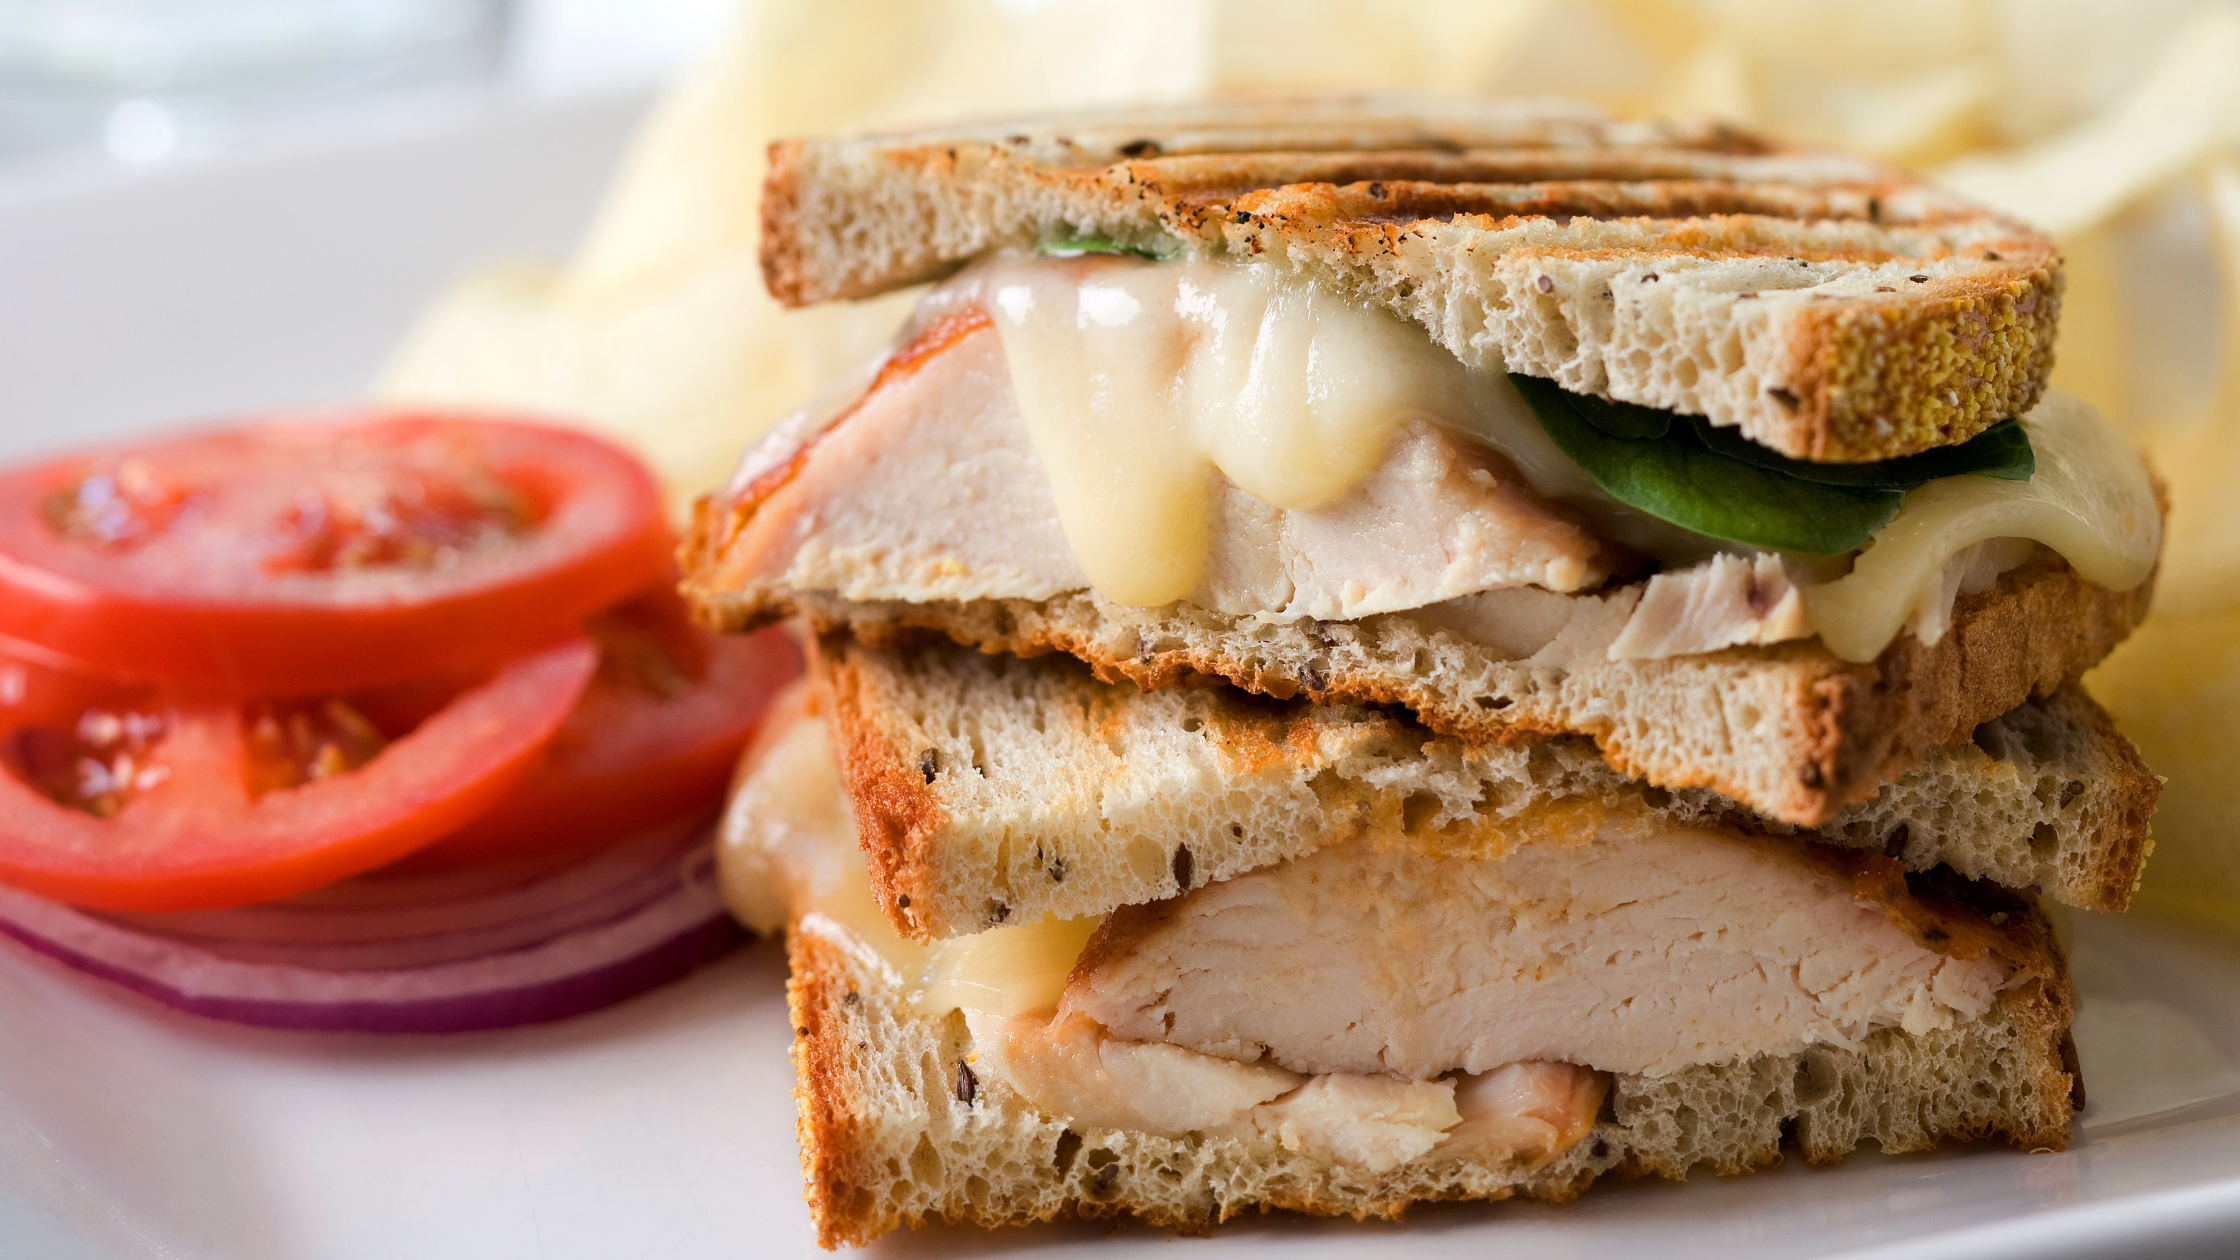 Flavorful Grilled Chicken & Brie Panini 2